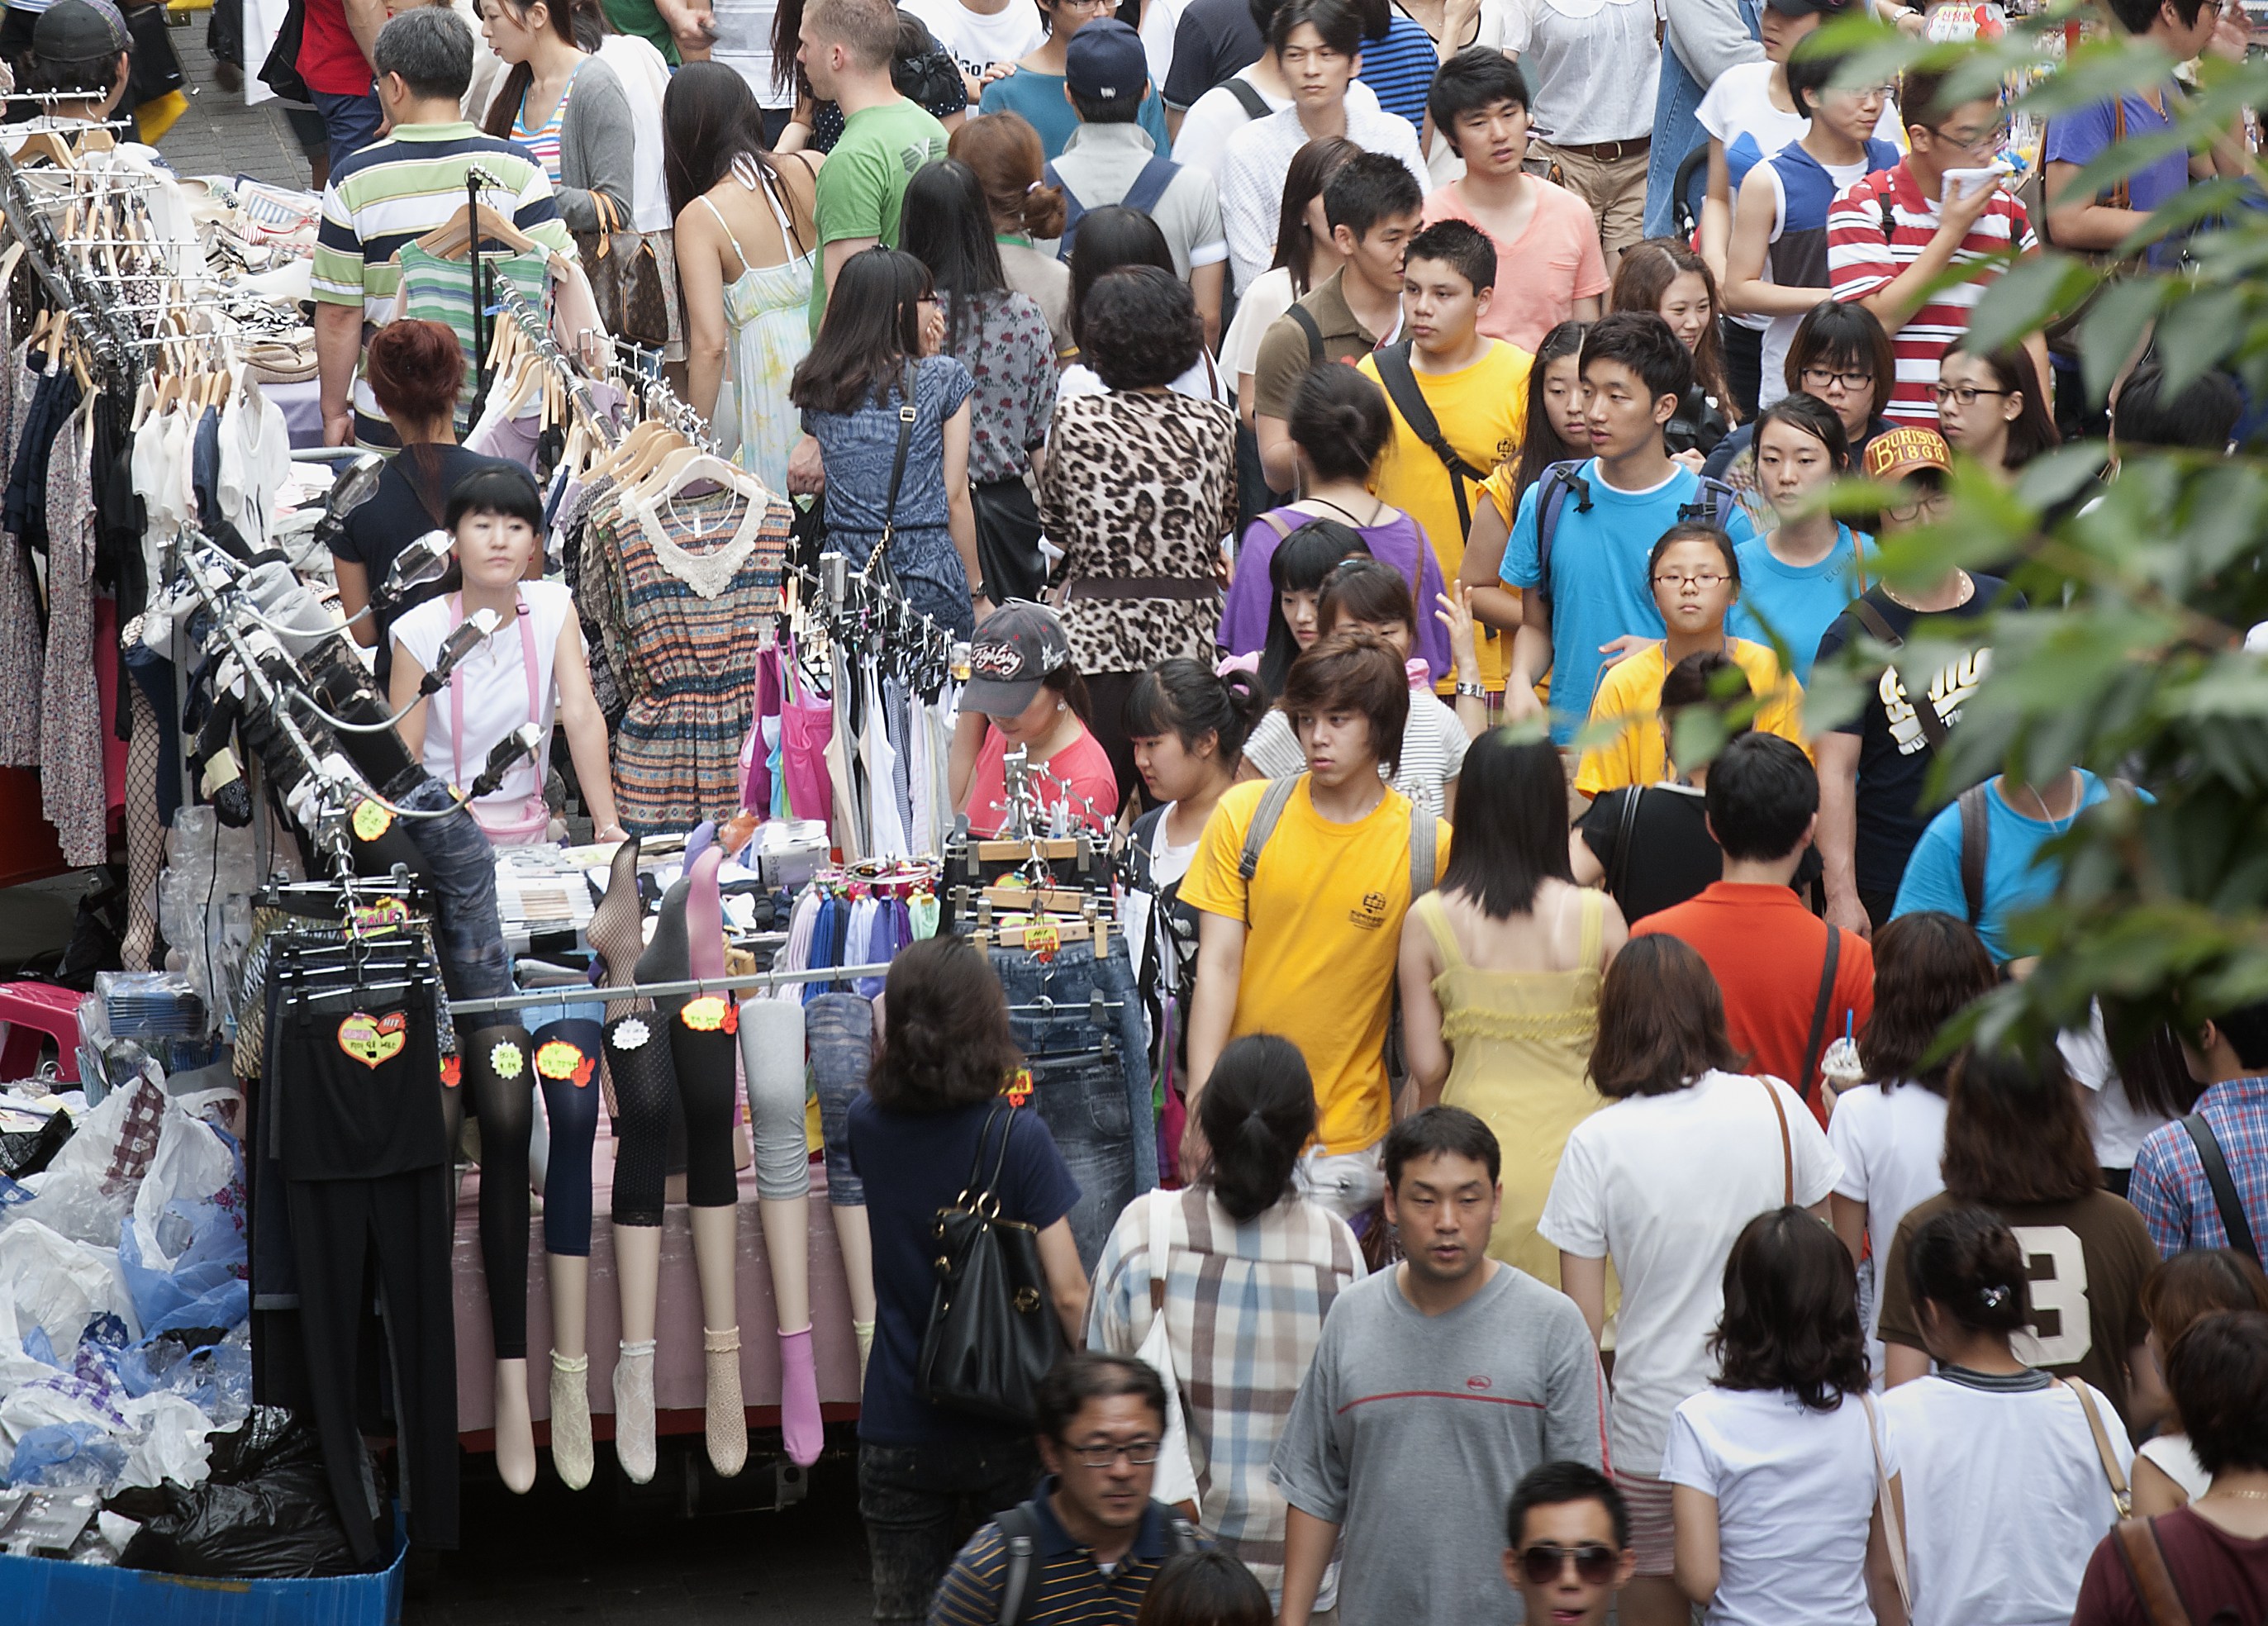 Photo: A throng of shoppers in Myungdong, downtown Seoul.